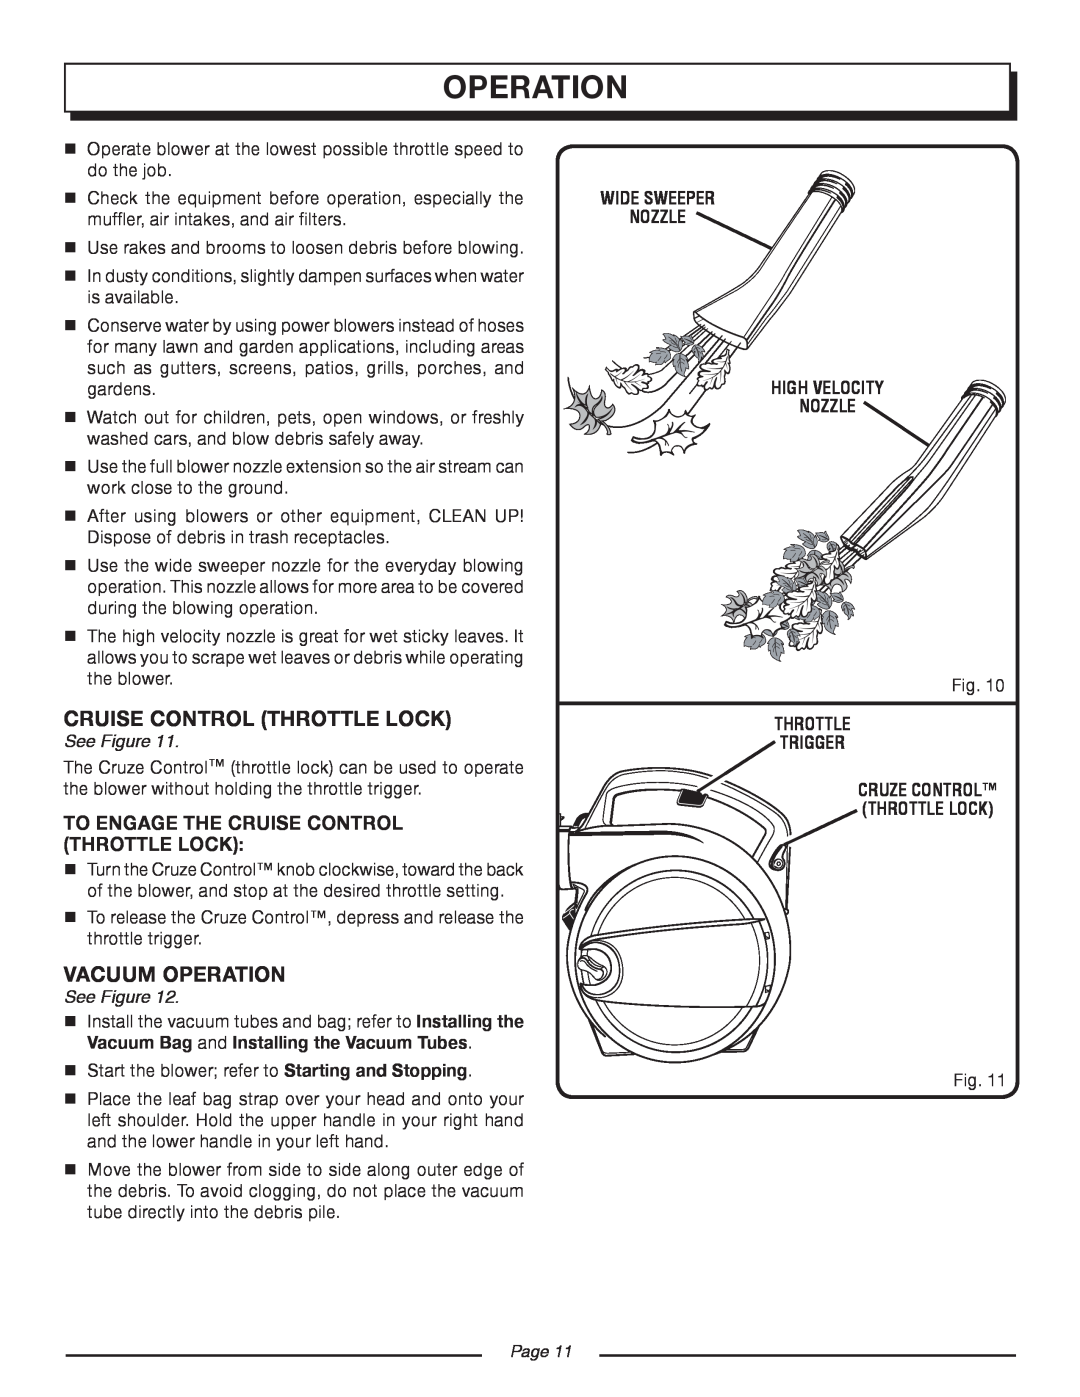 Homelite UT08934D manual Operation, To Engage The Cruise Control Throttle Lock, See Figure, Throttle Trigger, Page 